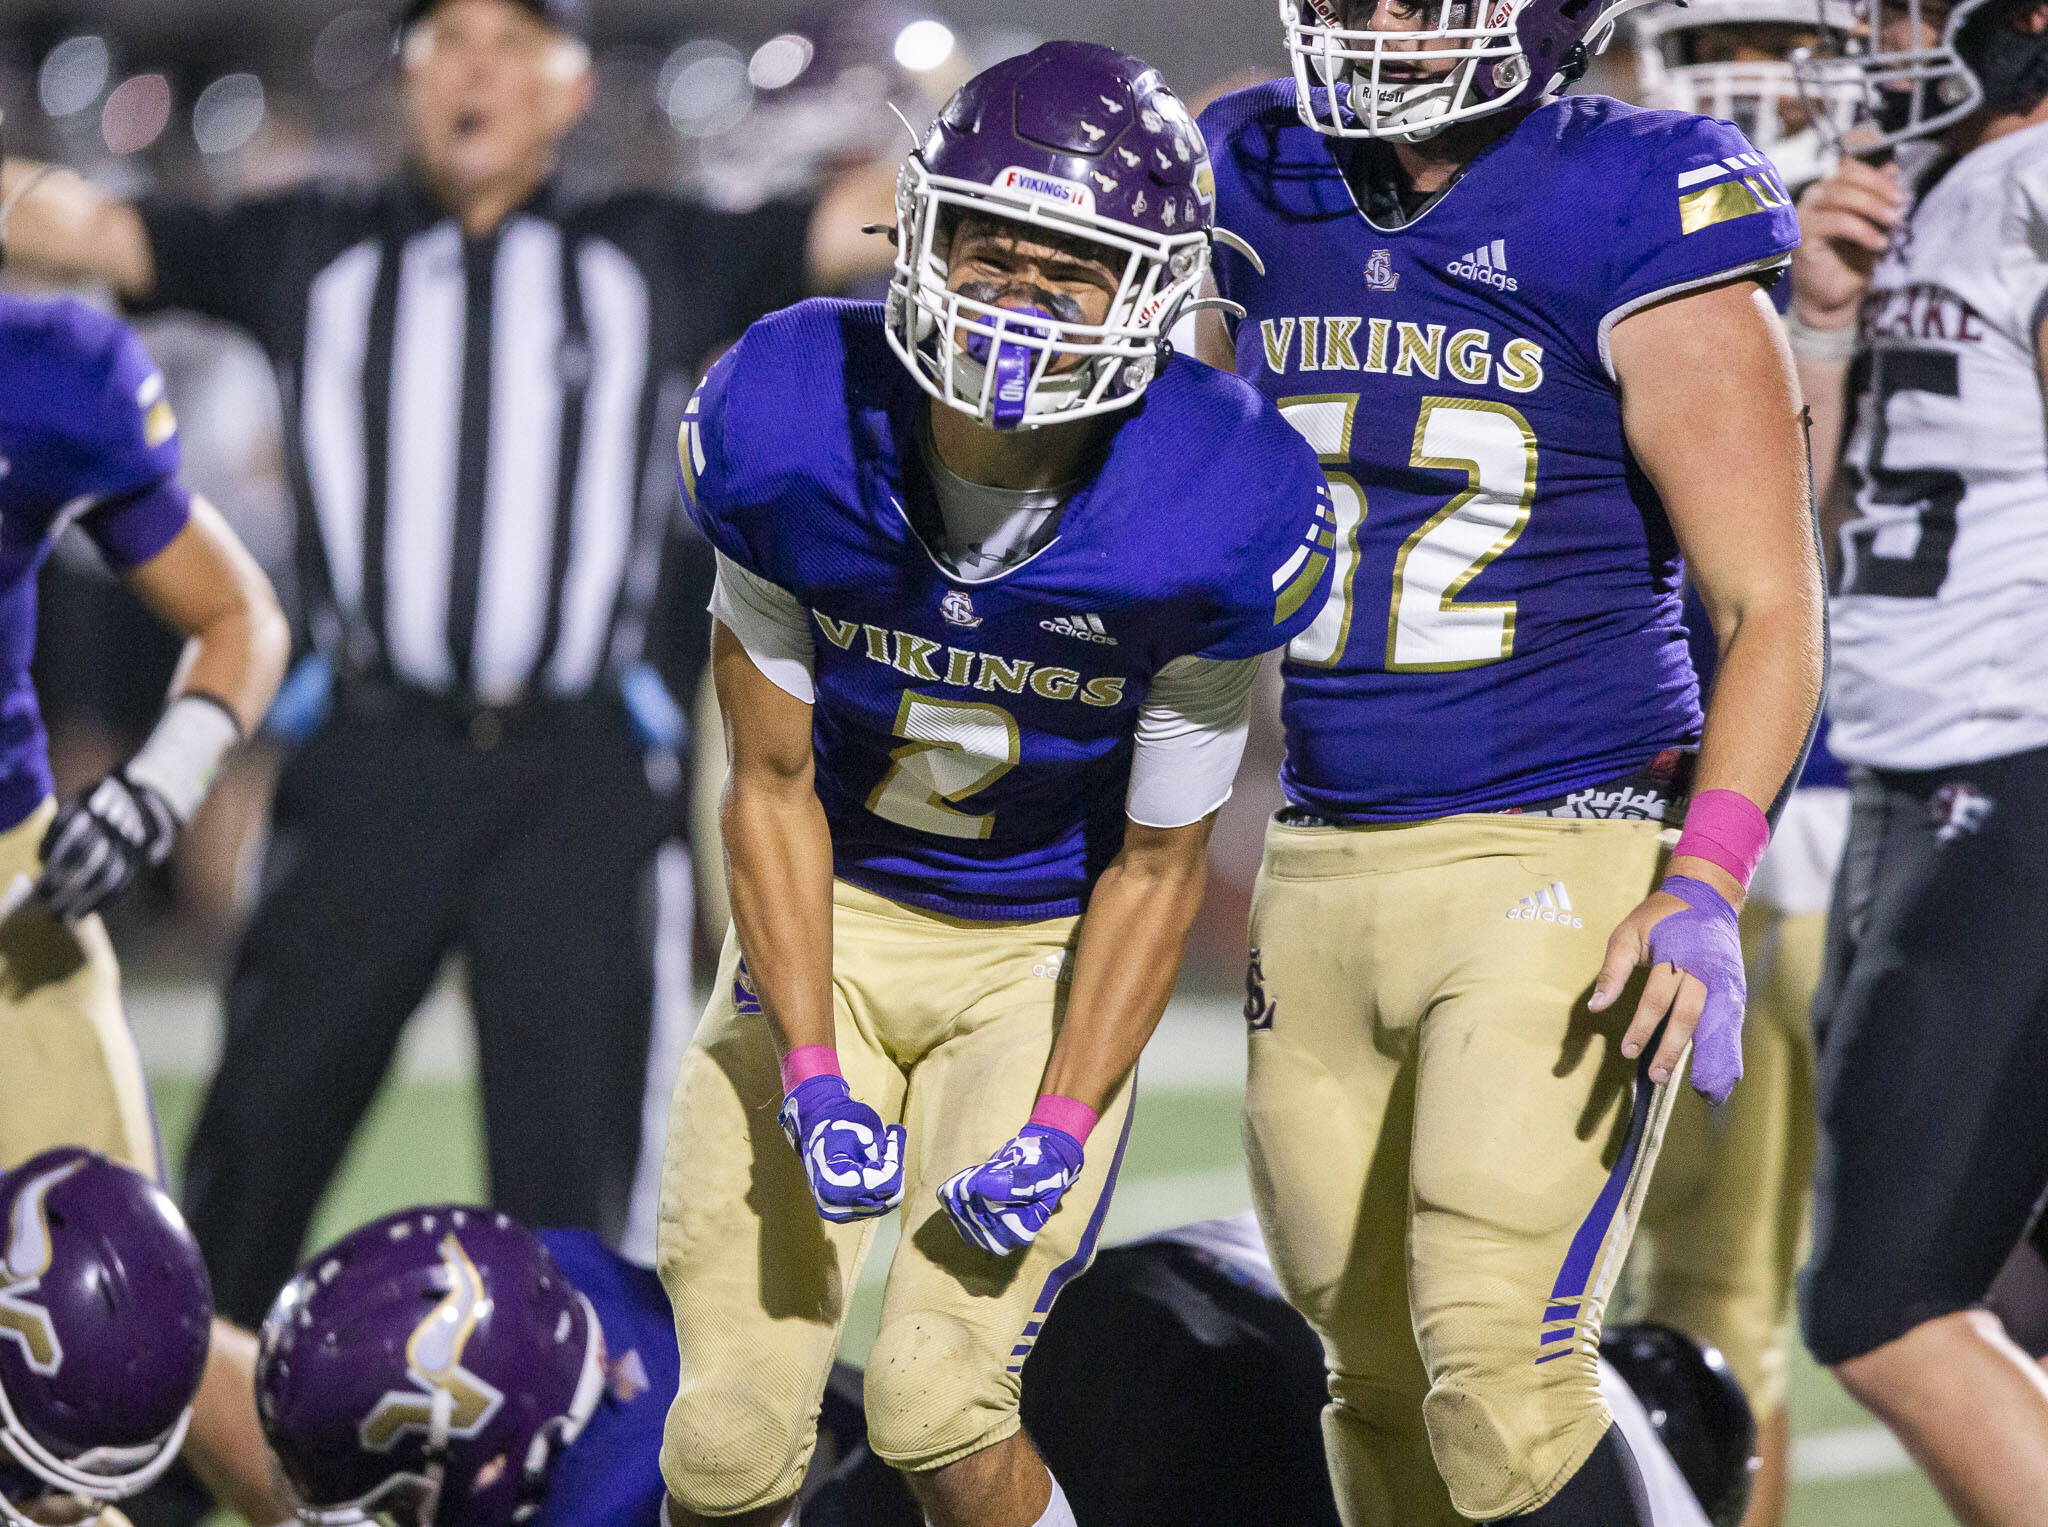 Lake Stevens’ Steven Lee Jr. reacts to getting a stop during a game against Eastlake on Oct. 7, 2022, in Lake Stevens. (Olivia Vanni / The Herald)